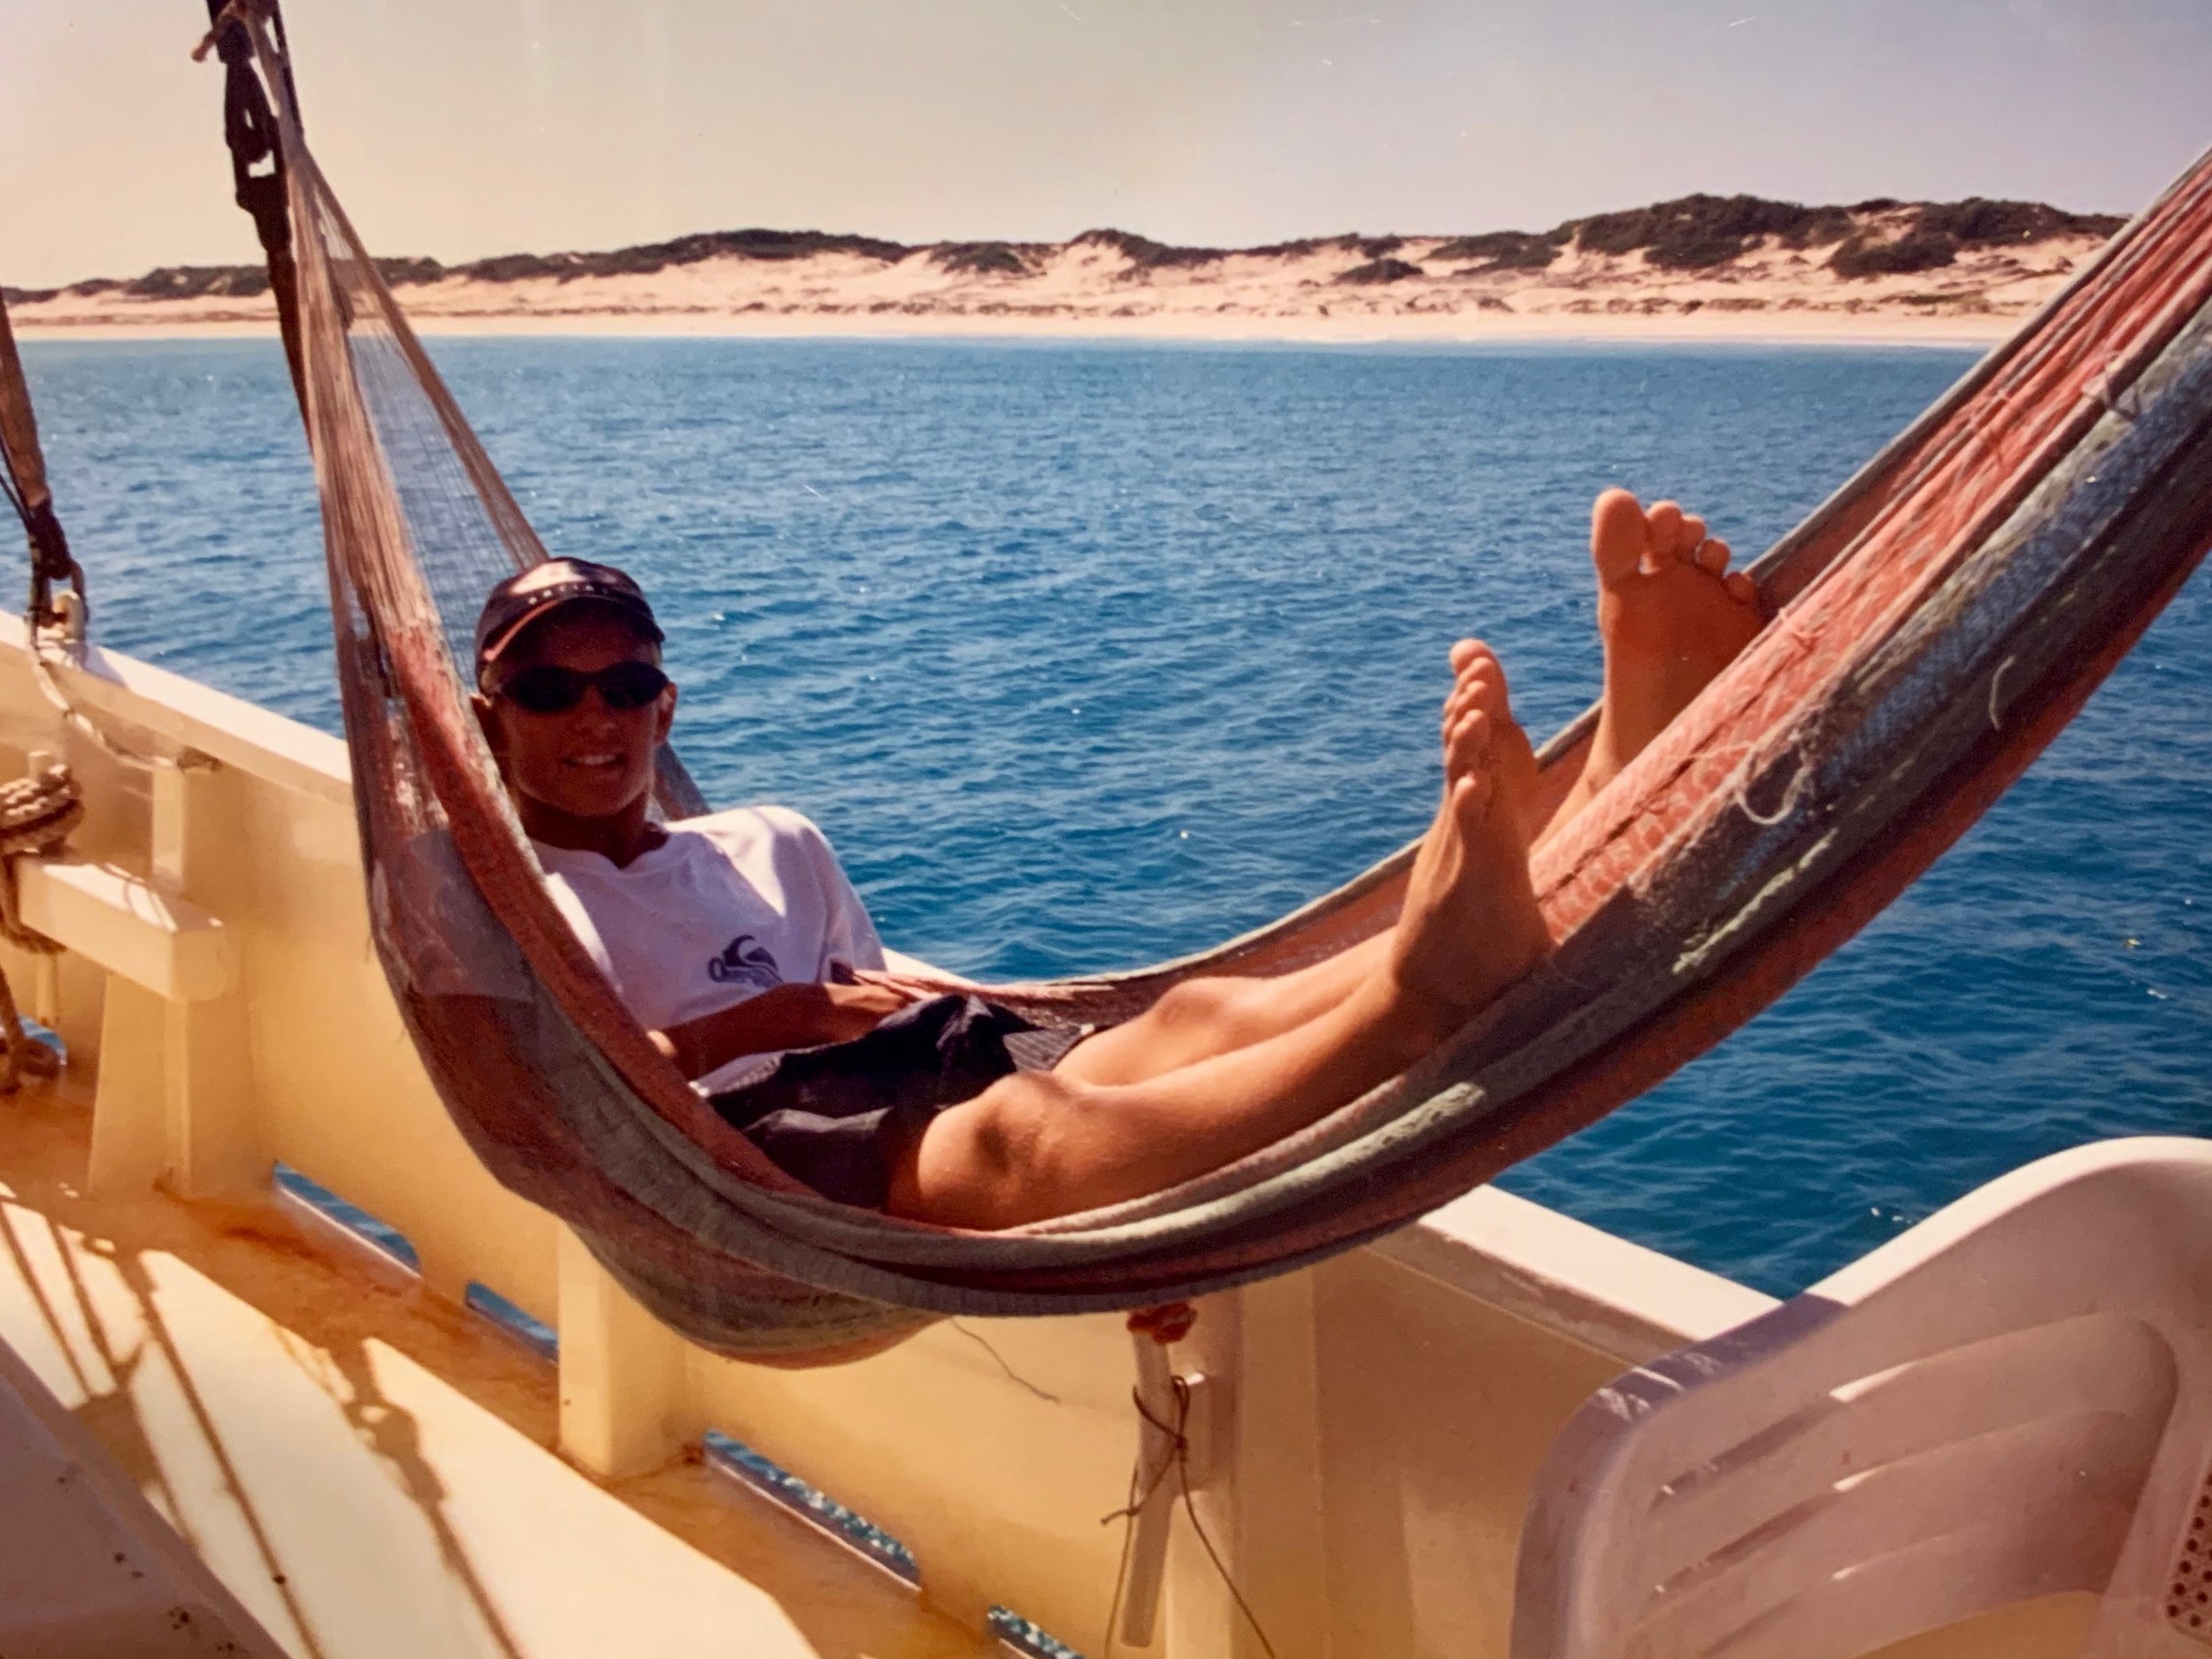 Working hard, or hardly working? Aboard Broome's old pearl lugger 'The Willie'.